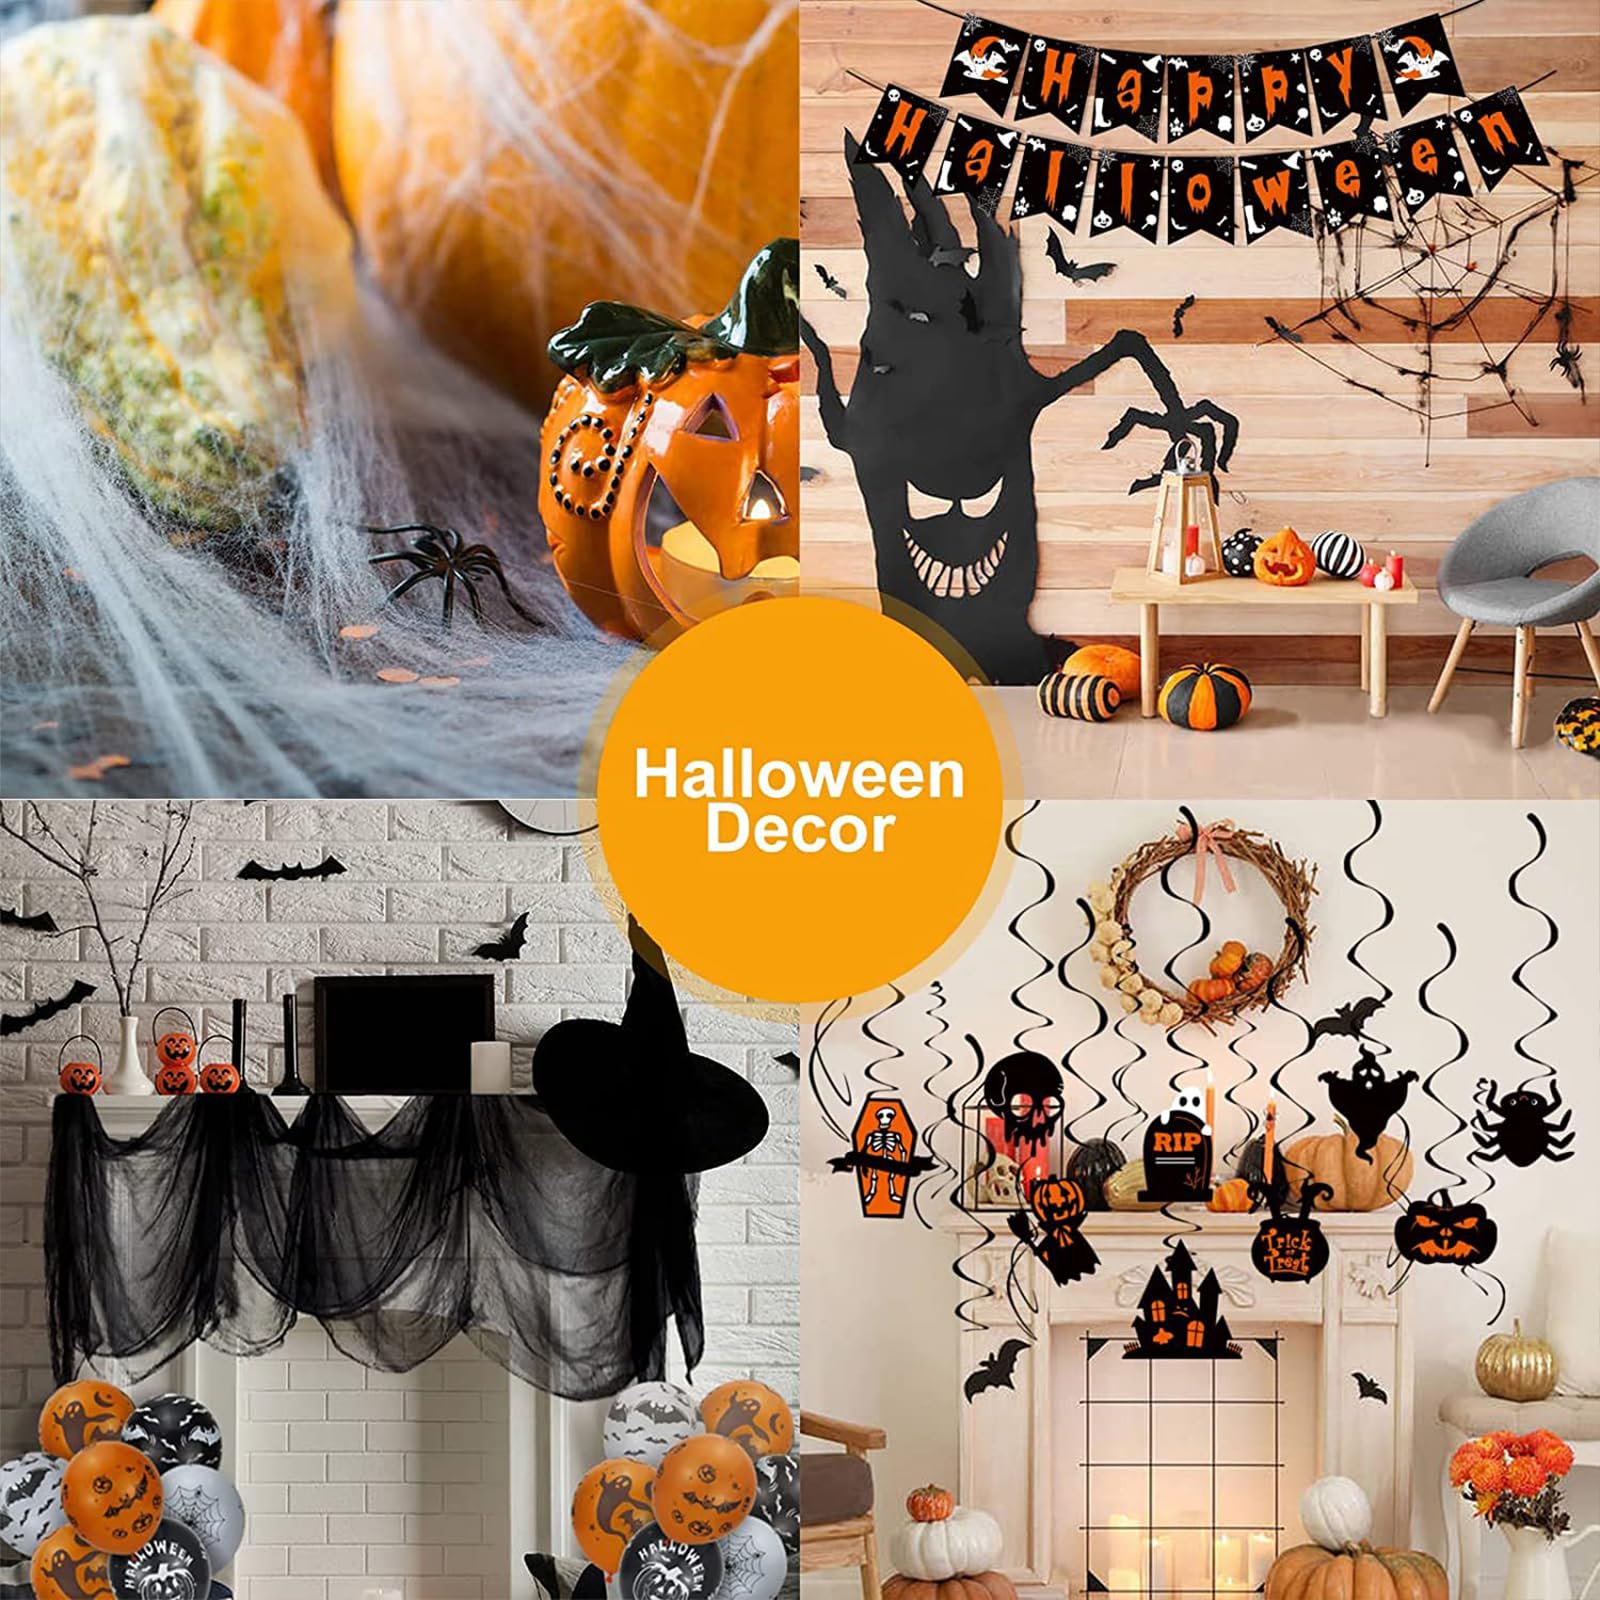 Banner Decorations for Home, BackdropDecor Party Favors for Class Office Ceiling Decor Yard Garden Outdoor (Halloween 52pcs)